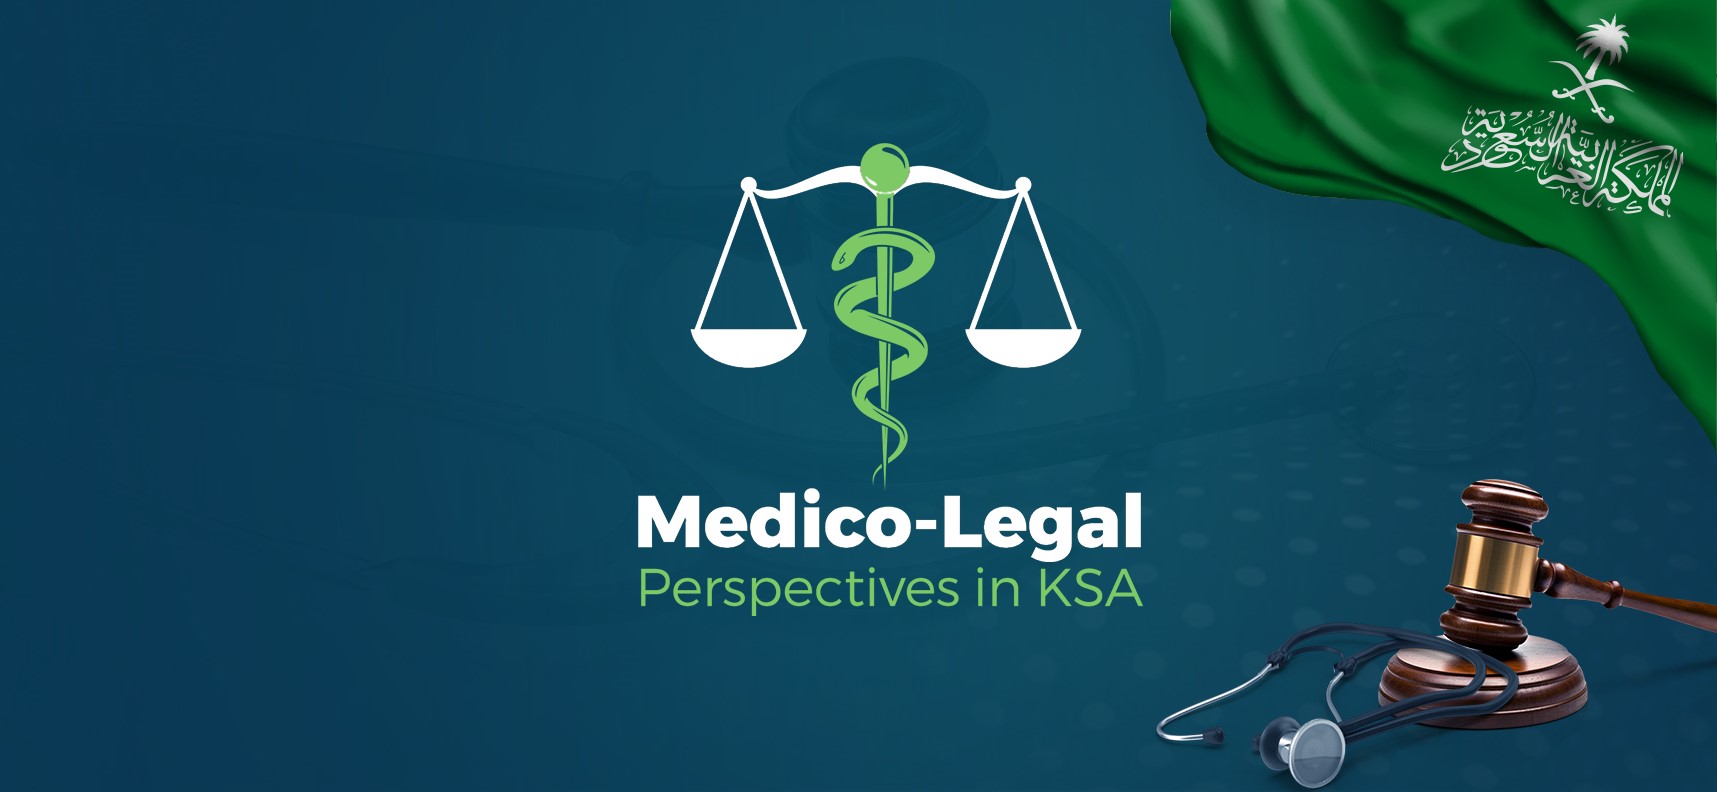 Care and Clarity: Medico-Legal Perspectives in KSA